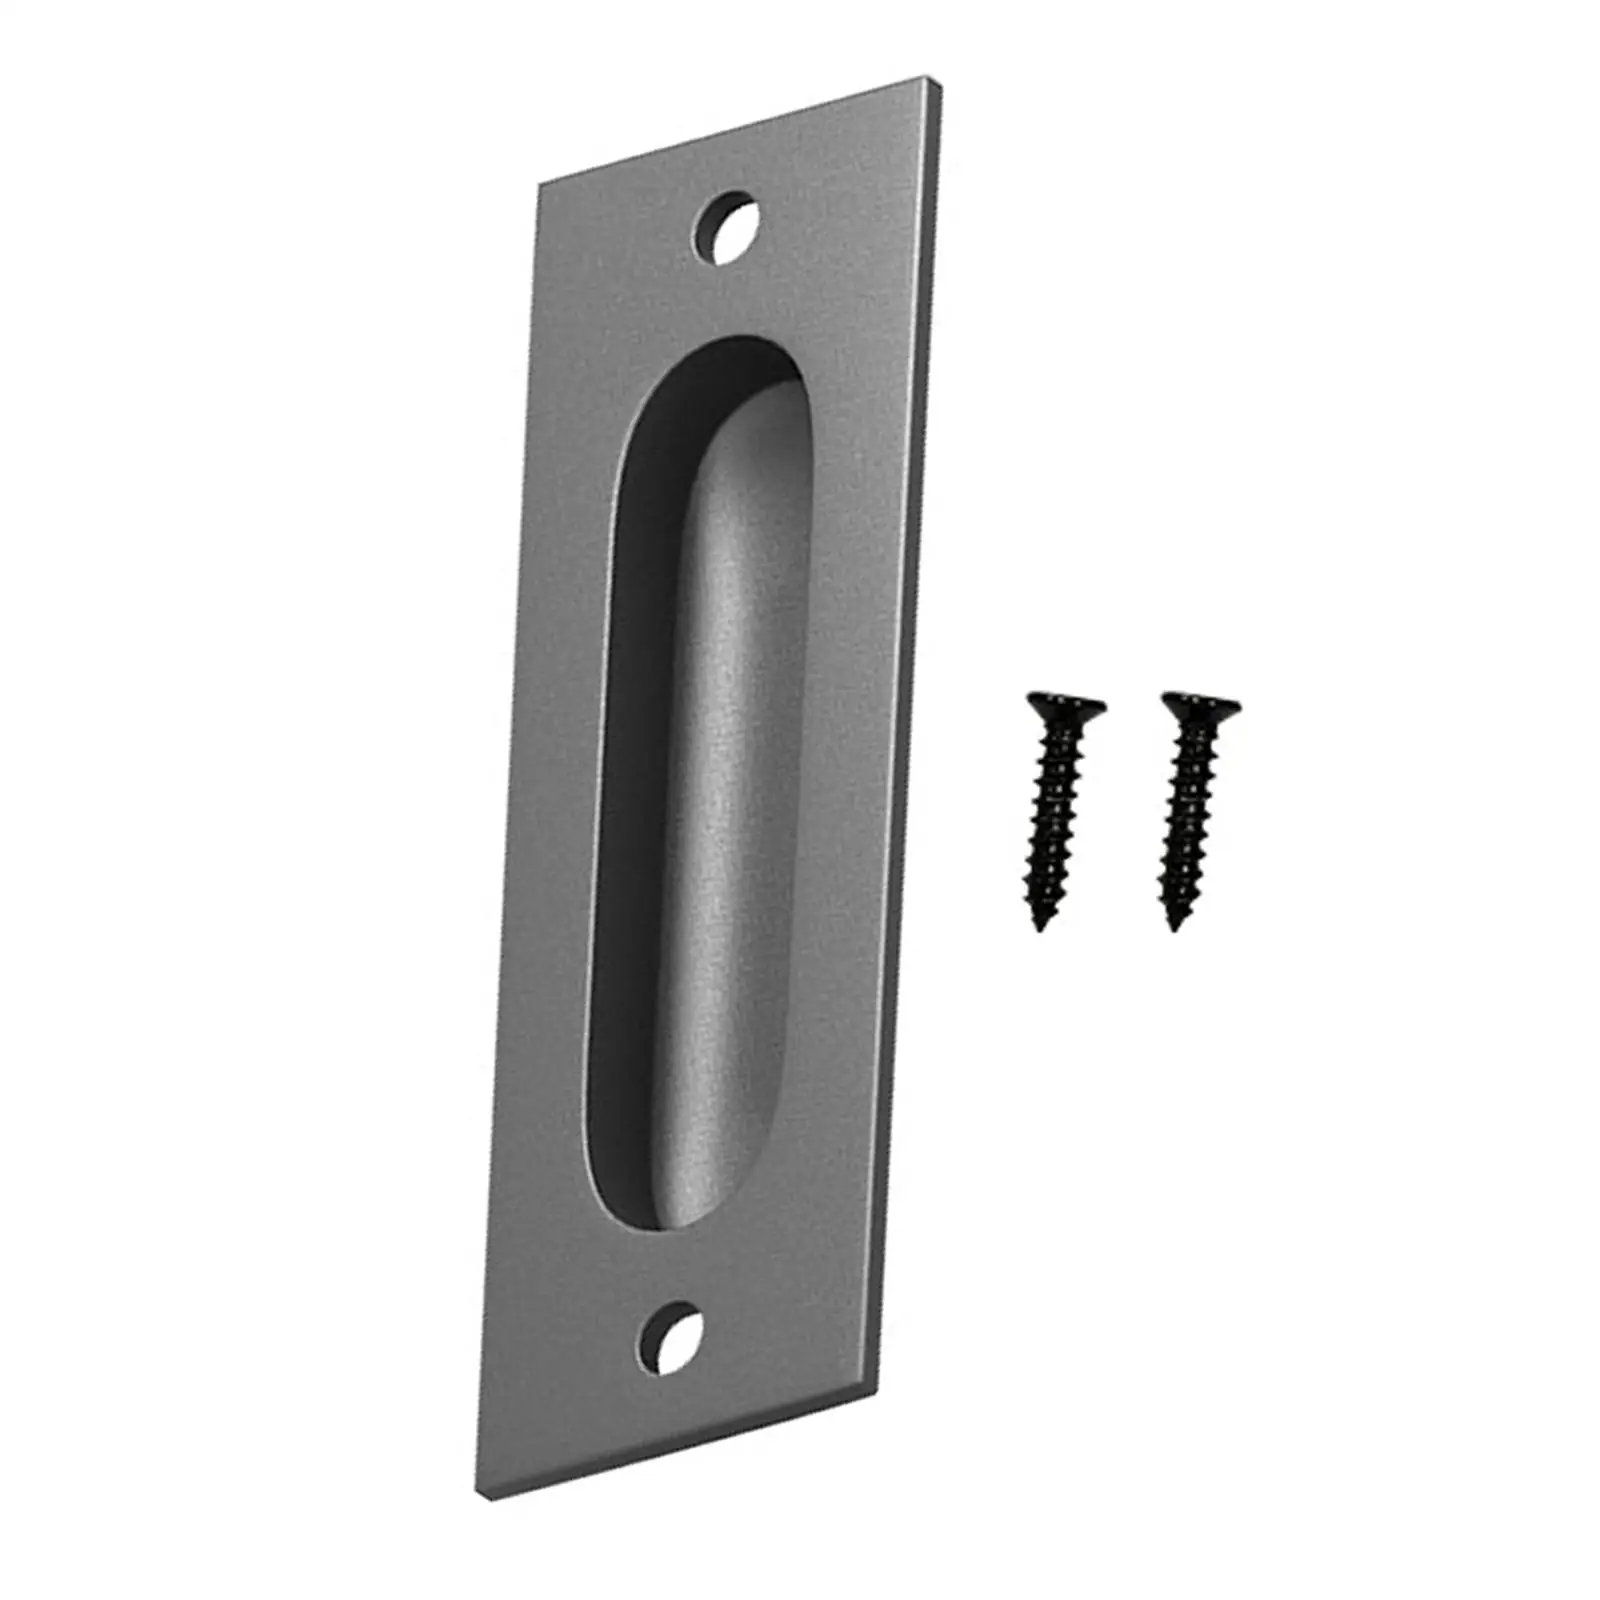 Sliding Closet Door Handles Finger Flush Handle Invisible Handle Simple Modern Easy to Install Heavy Duty for Wardrobe Closet